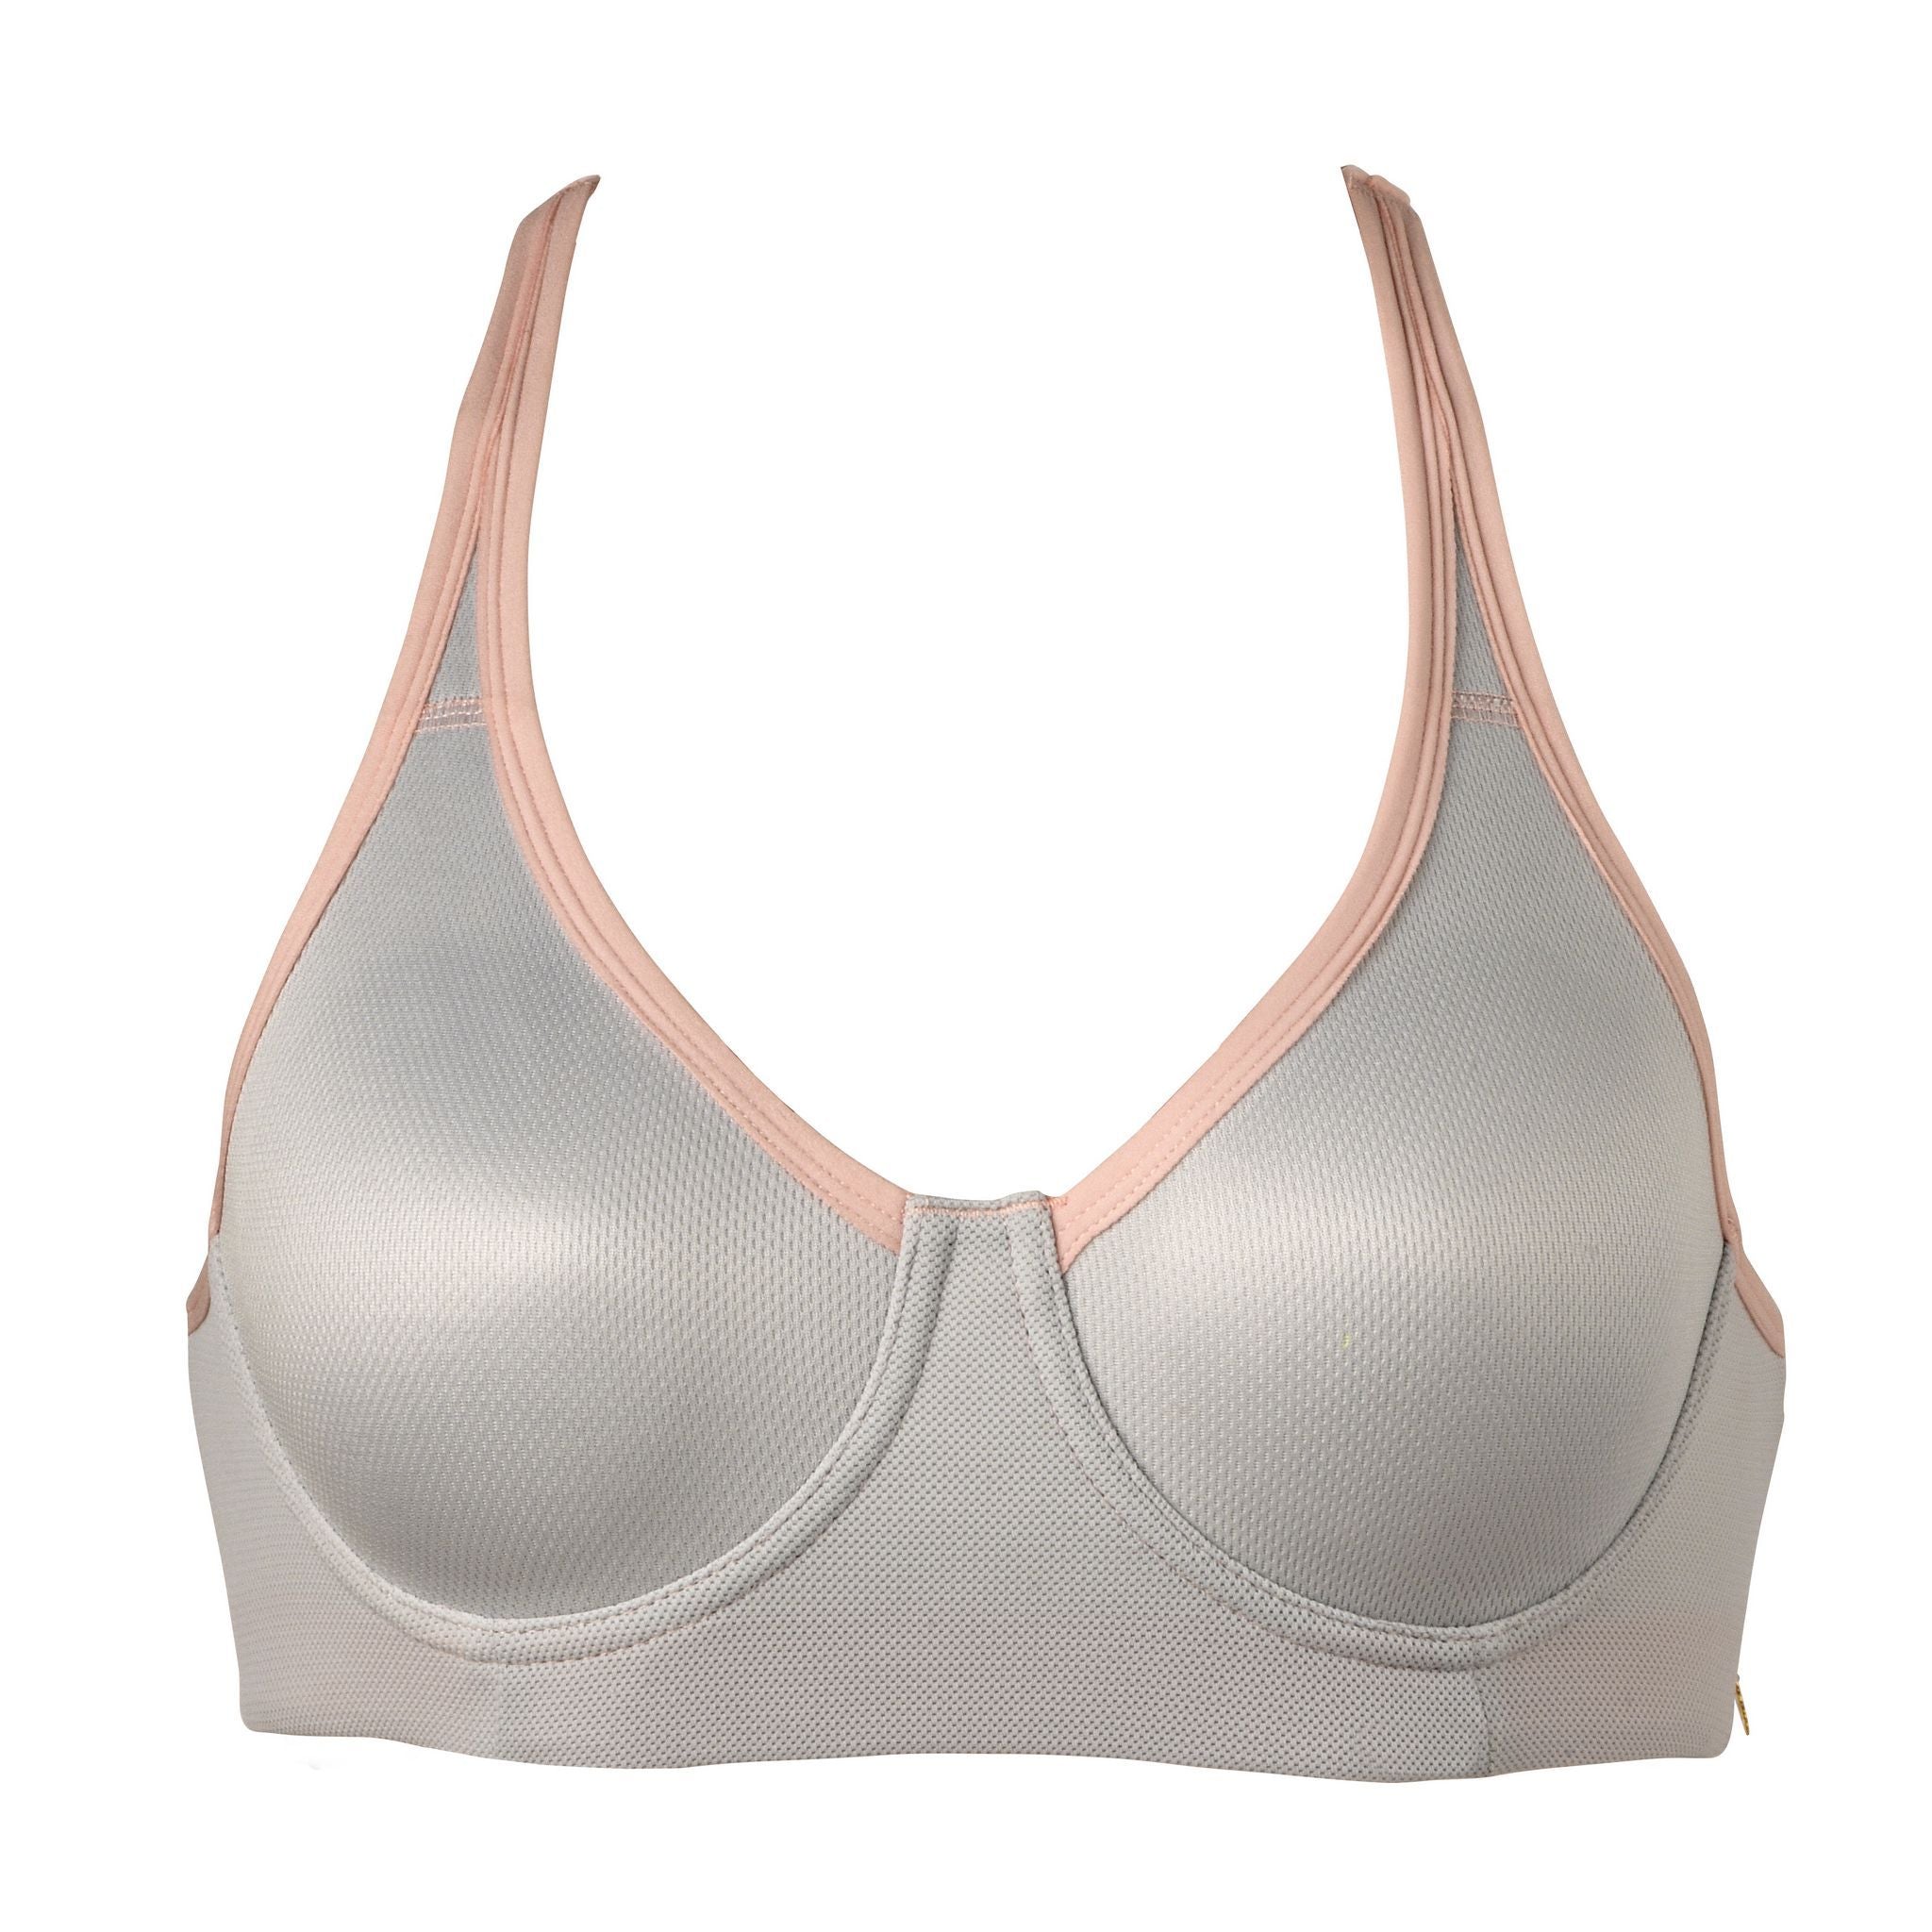 Kaye Larcky Bras for Complete Support